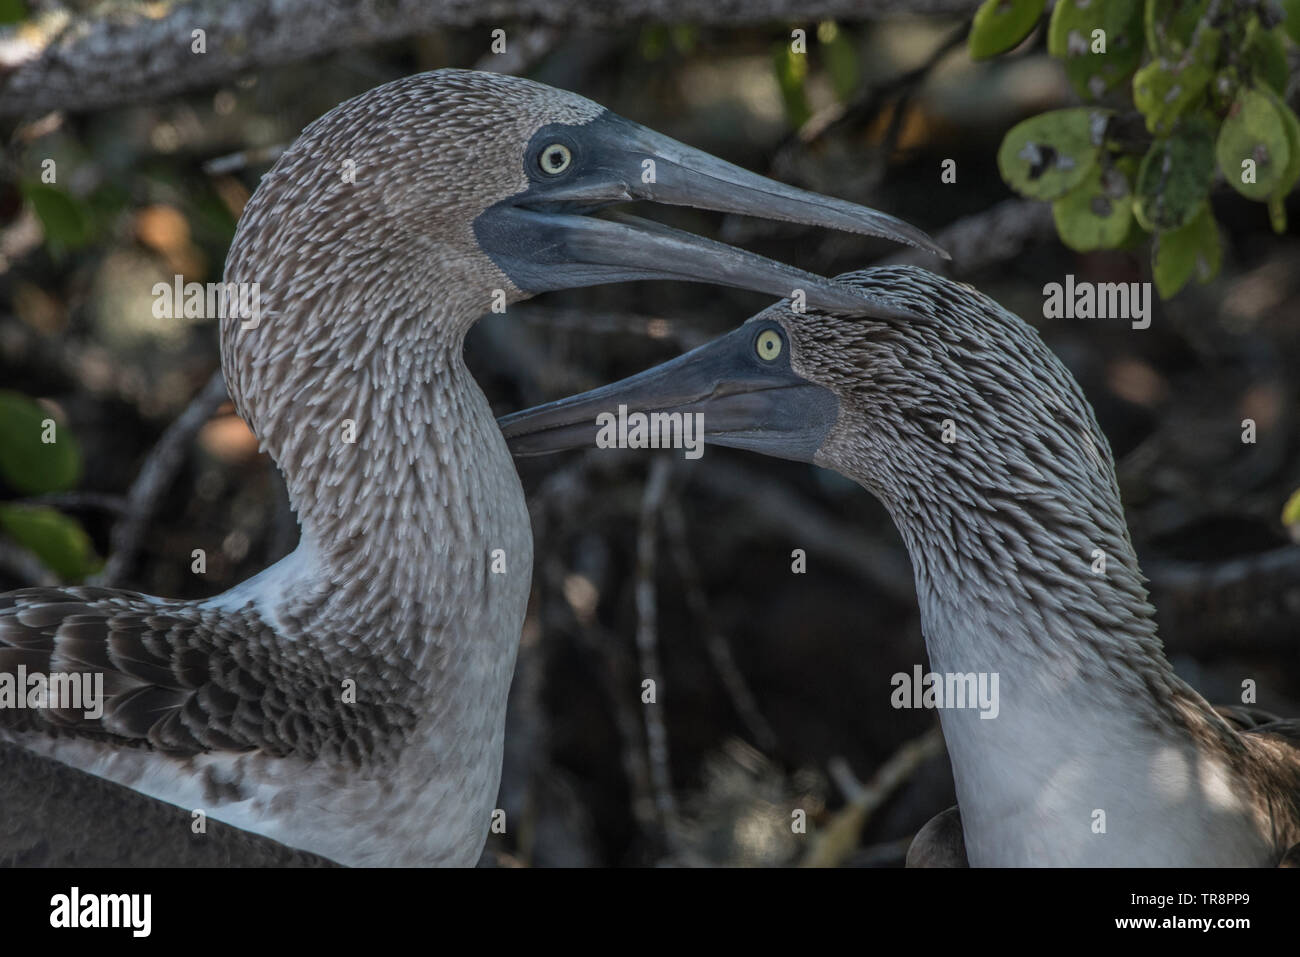 A pair of blue footed boobies (Sula nebouxii excisa), from the Galapagos islands, Ecuador.  A galapagos endemic subspecies. Stock Photo